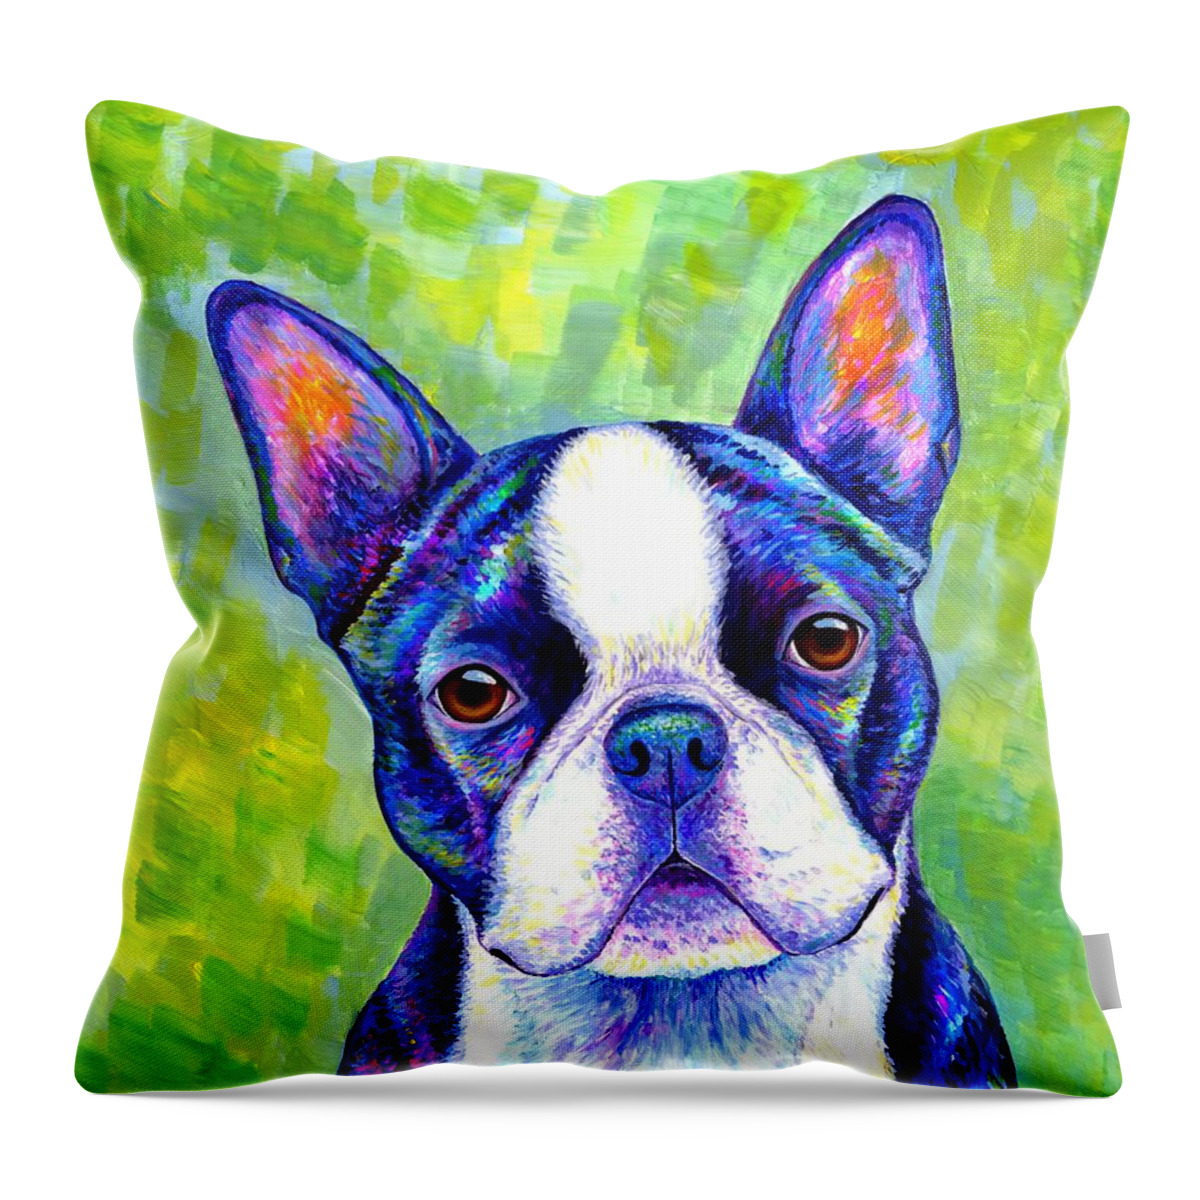 Boston Terrier Throw Pillow featuring the painting Effervescent - Colorful Boston Terrier Dog by Rebecca Wang